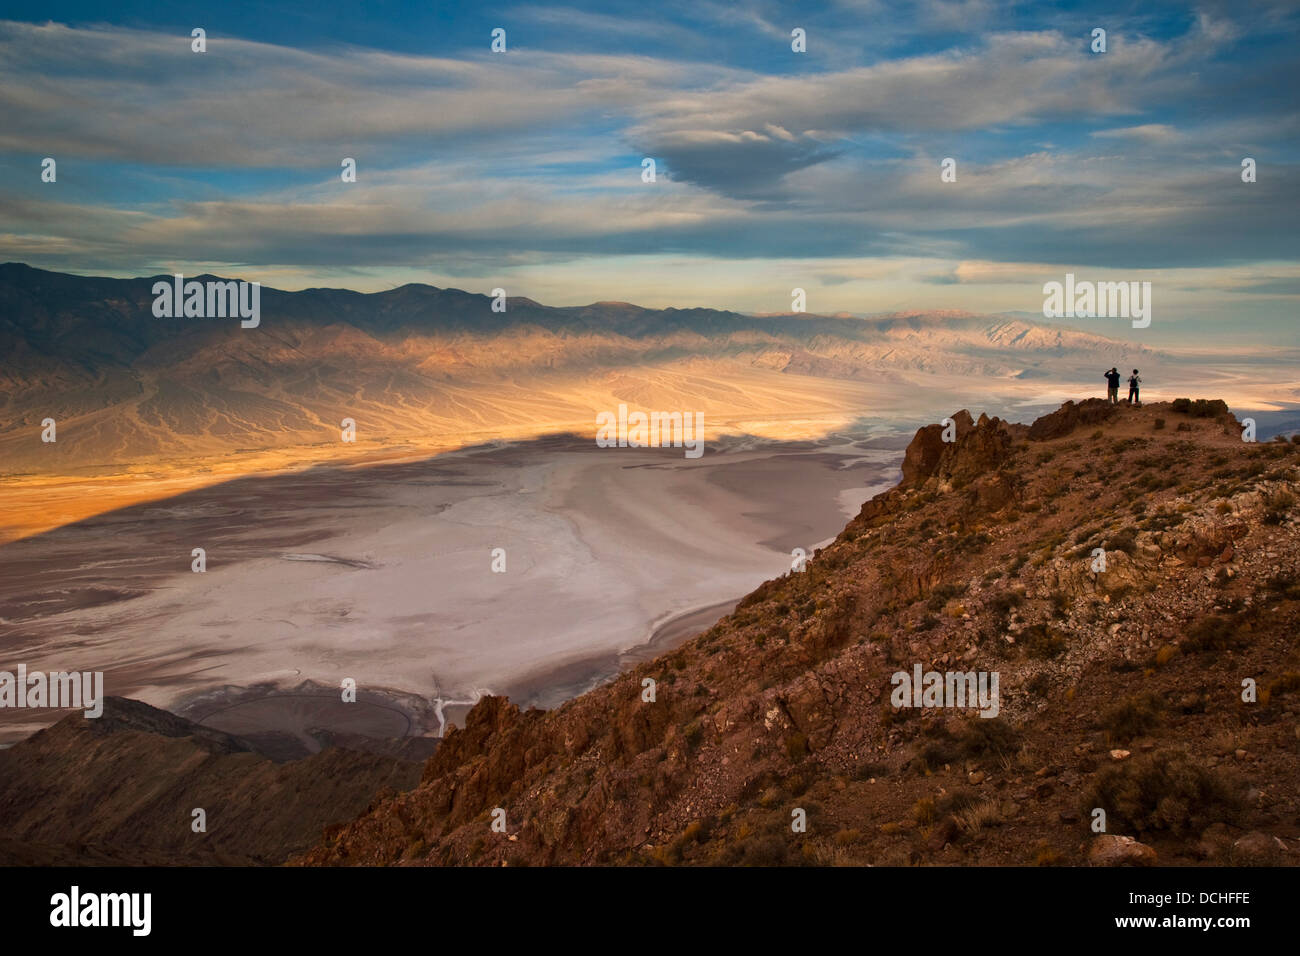 Tourists overlooking Panamint Mountains over Badwater Basin, from Dantes View, Death Valley National Park, California Stock Photo